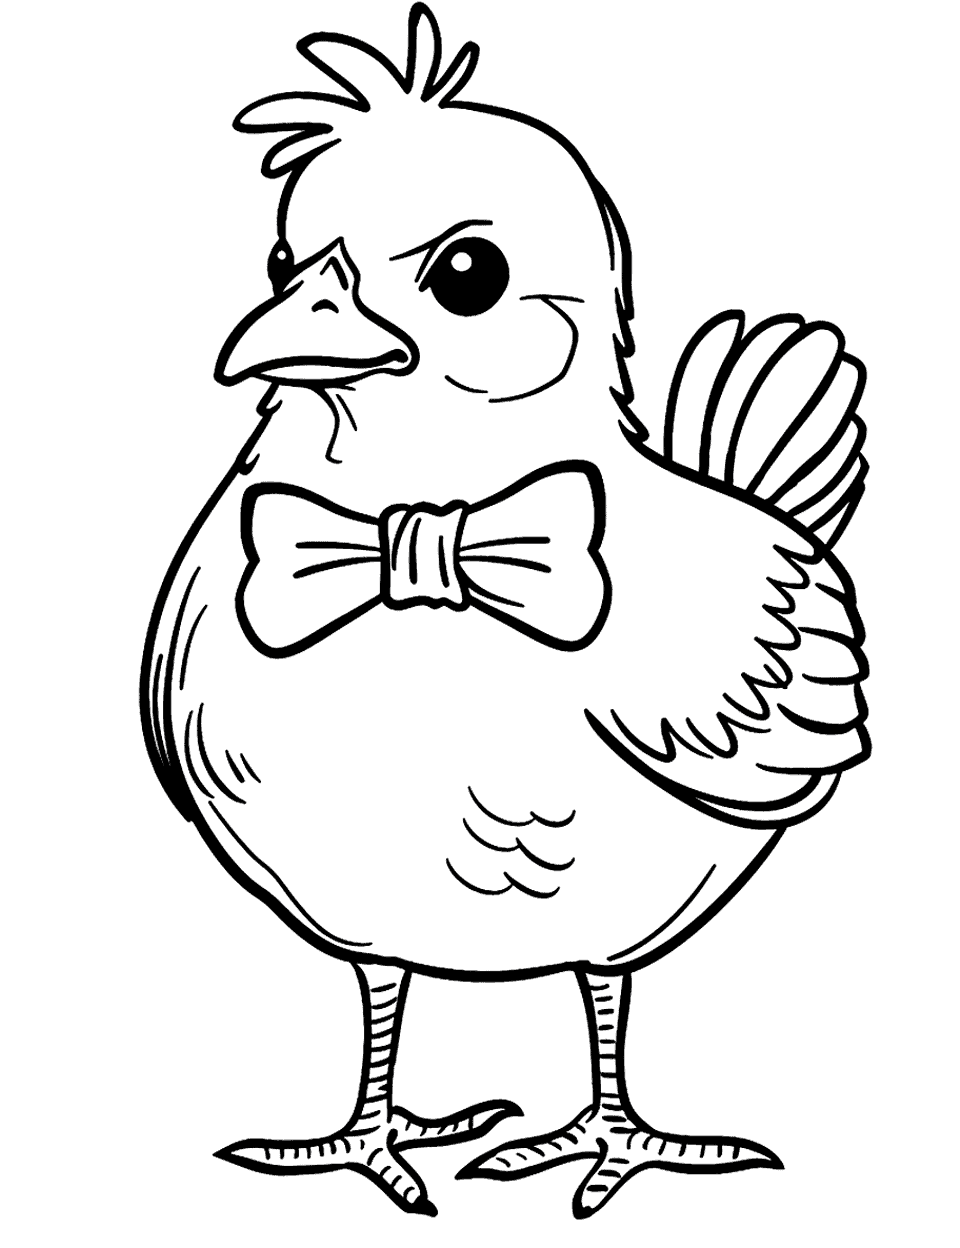 Chick Wearing a Bow Tie Chicken Coloring Page - A charming chick dressed up with a bow tie, looking dapper.